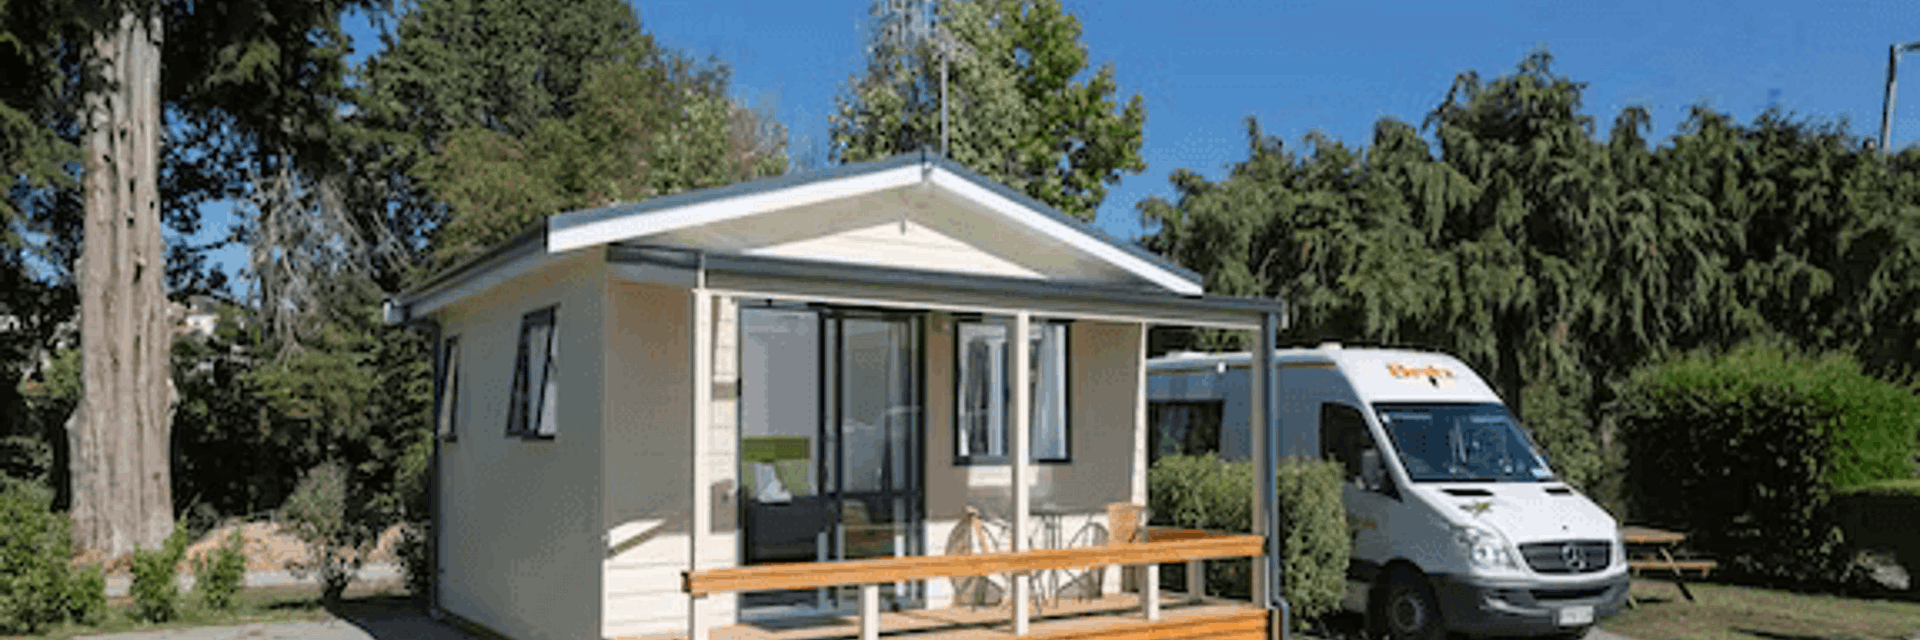 Motel rooms and cabins in Timaru